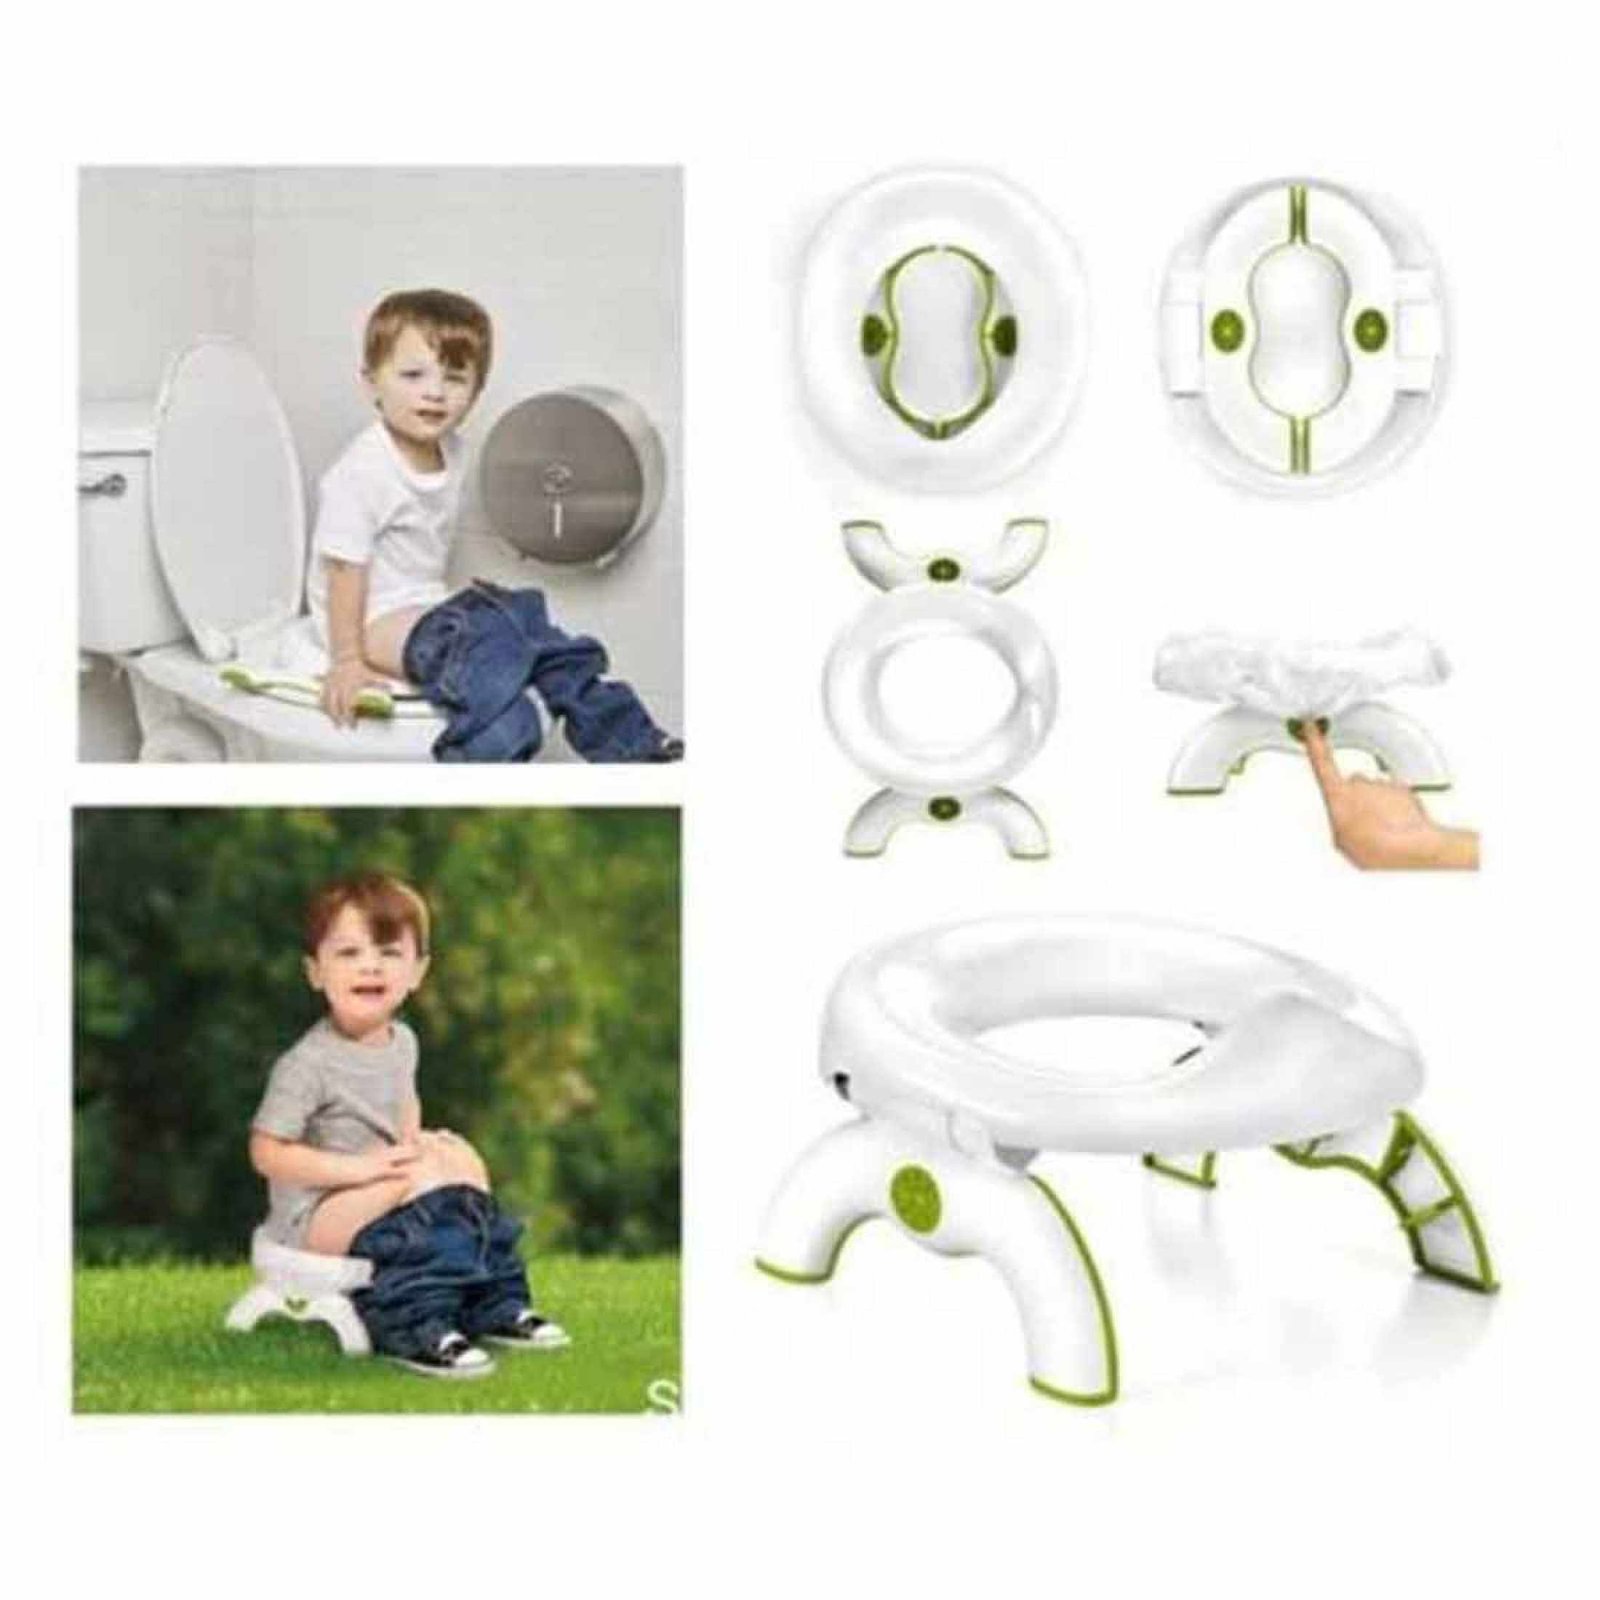 2 In 1 Go Baby Potty Home Outside Multifunctional Folding Portable Travel Toilet